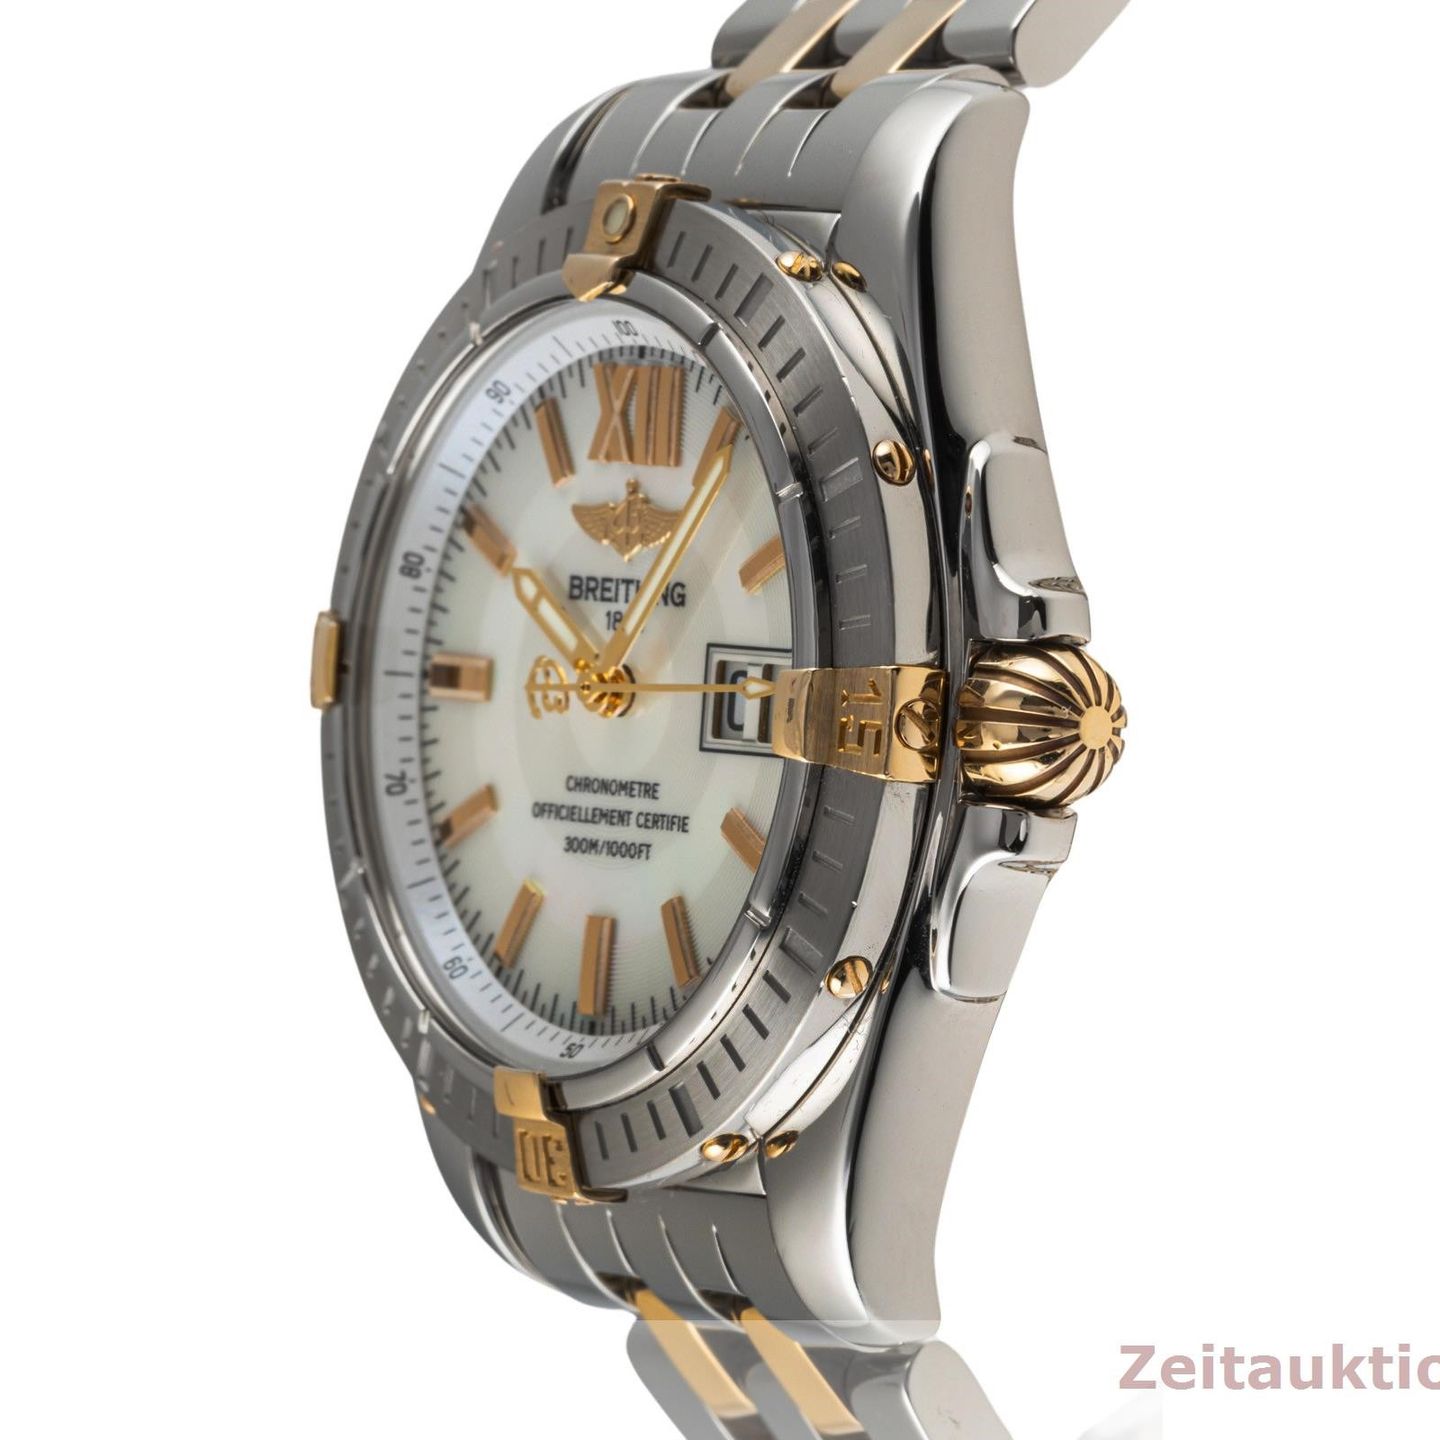 Breitling Cockpit B4935011A669 (2005) - White dial 41 mm Gold/Steel case (6/8)